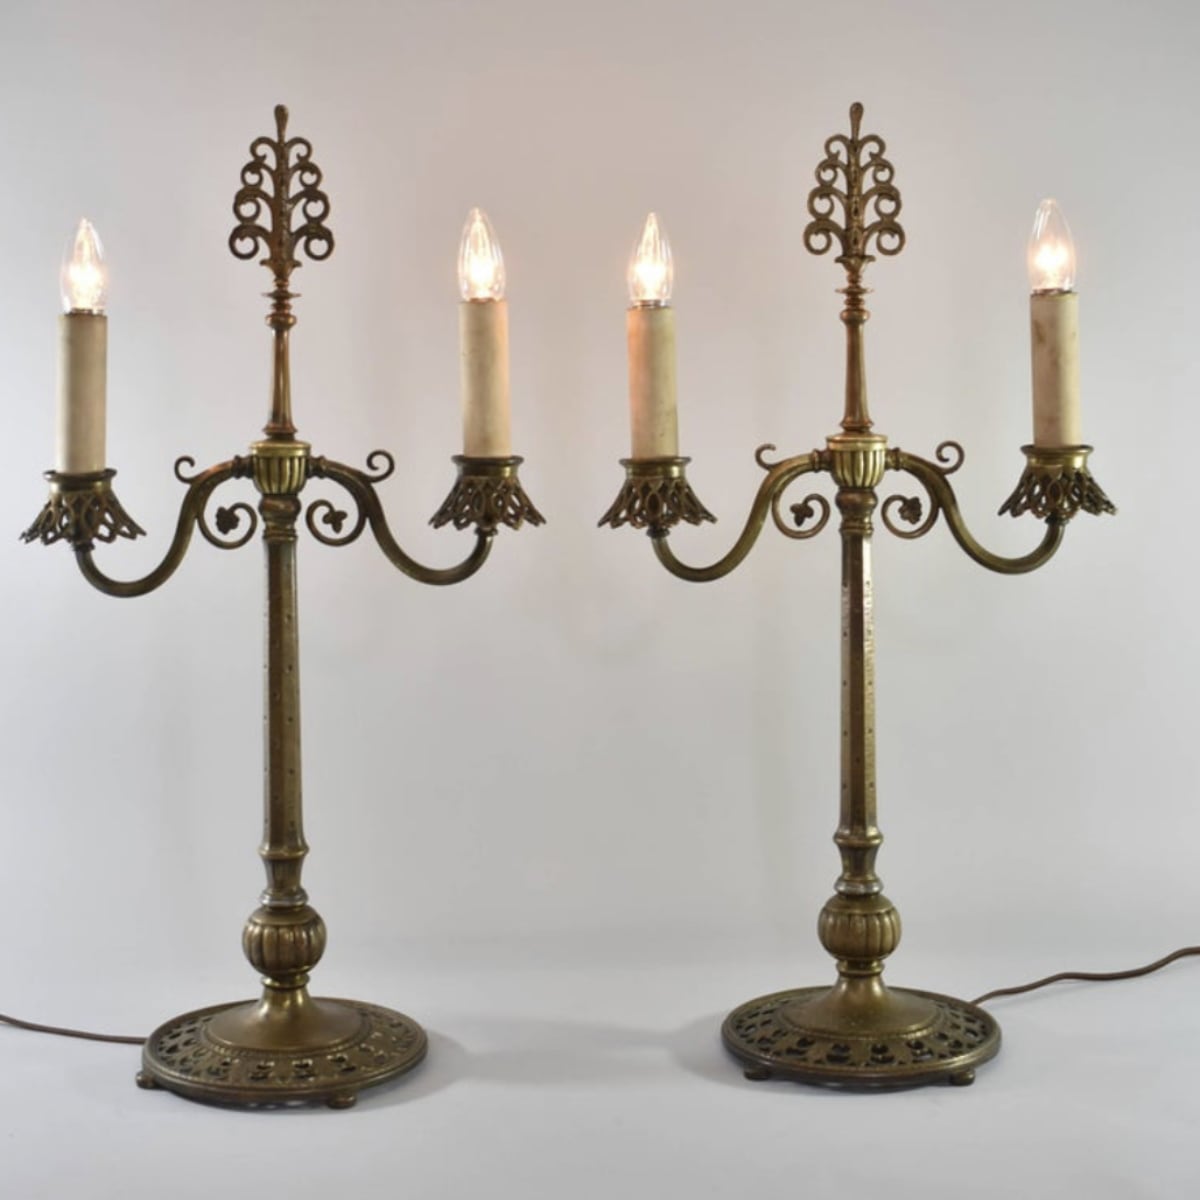 Two vintage lamps